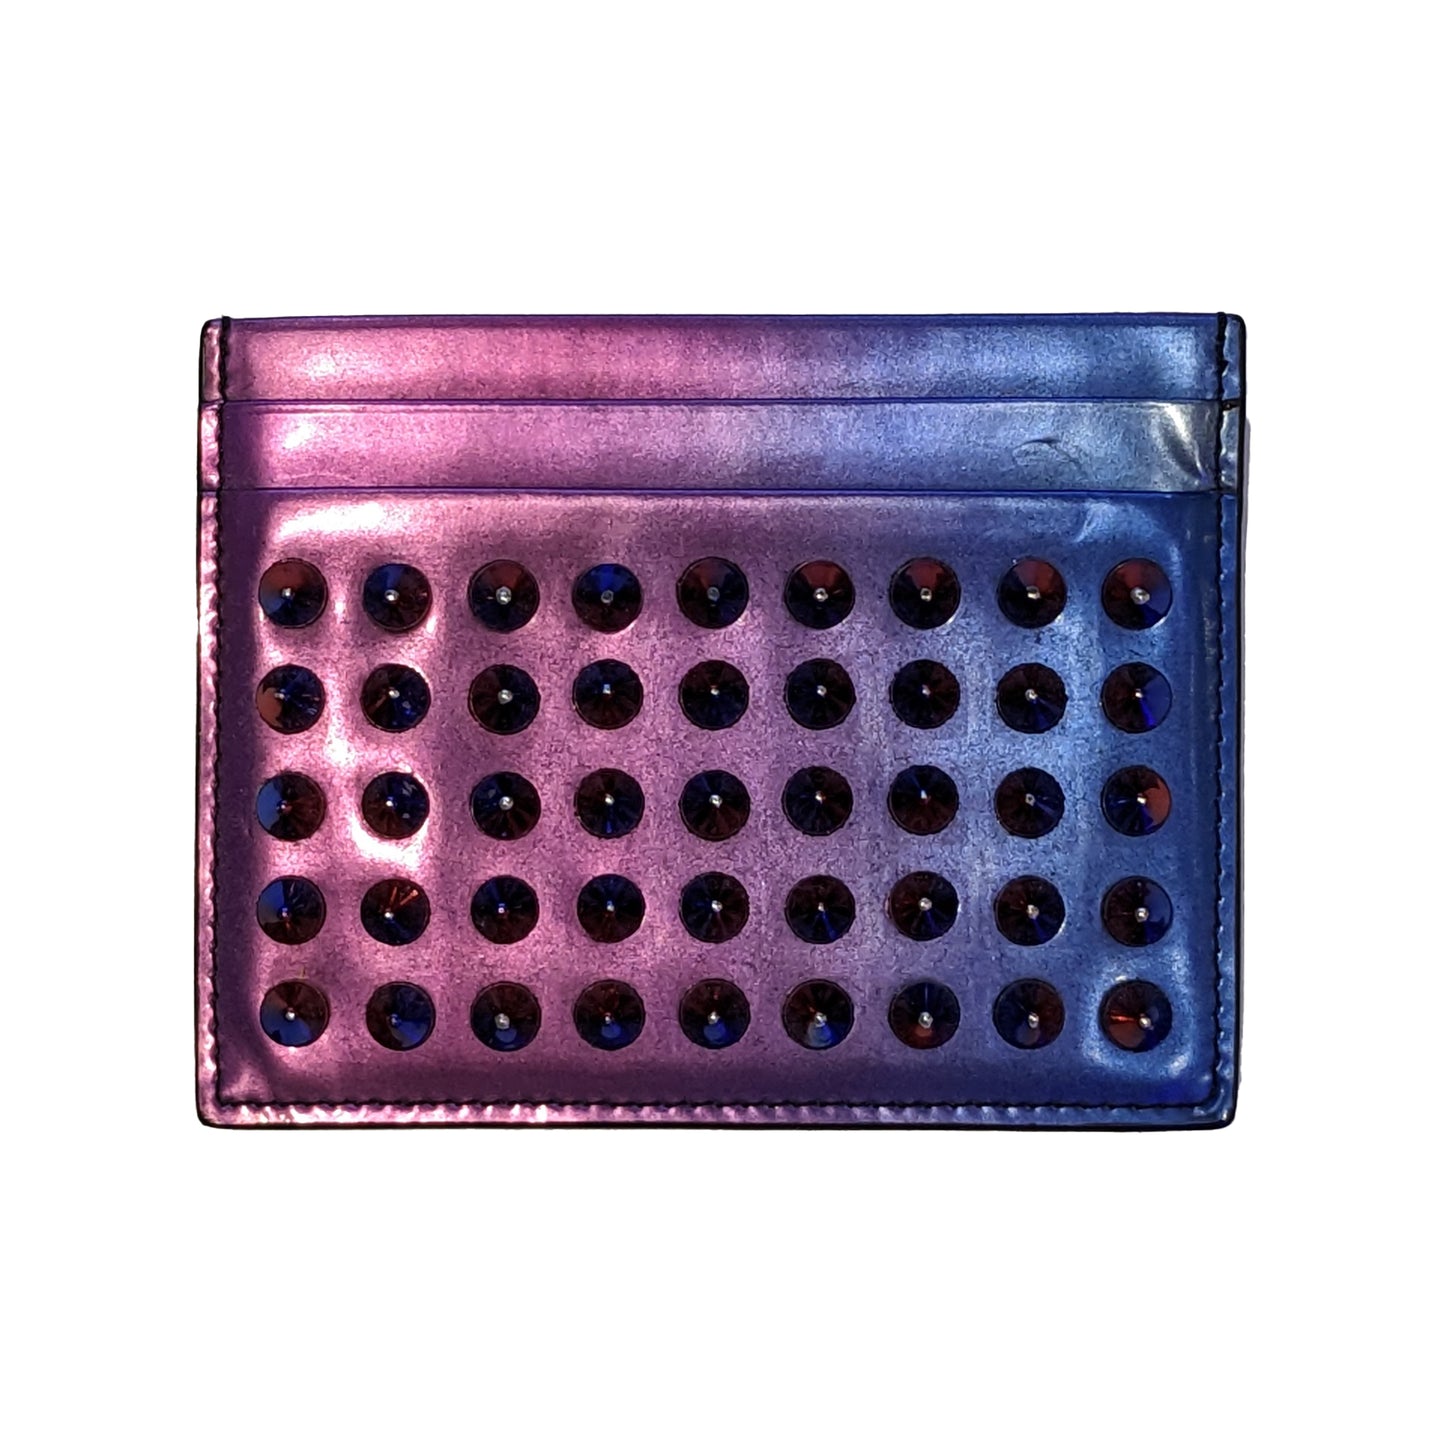 Christian Louboutin Card Holder Blue/Red Gradient